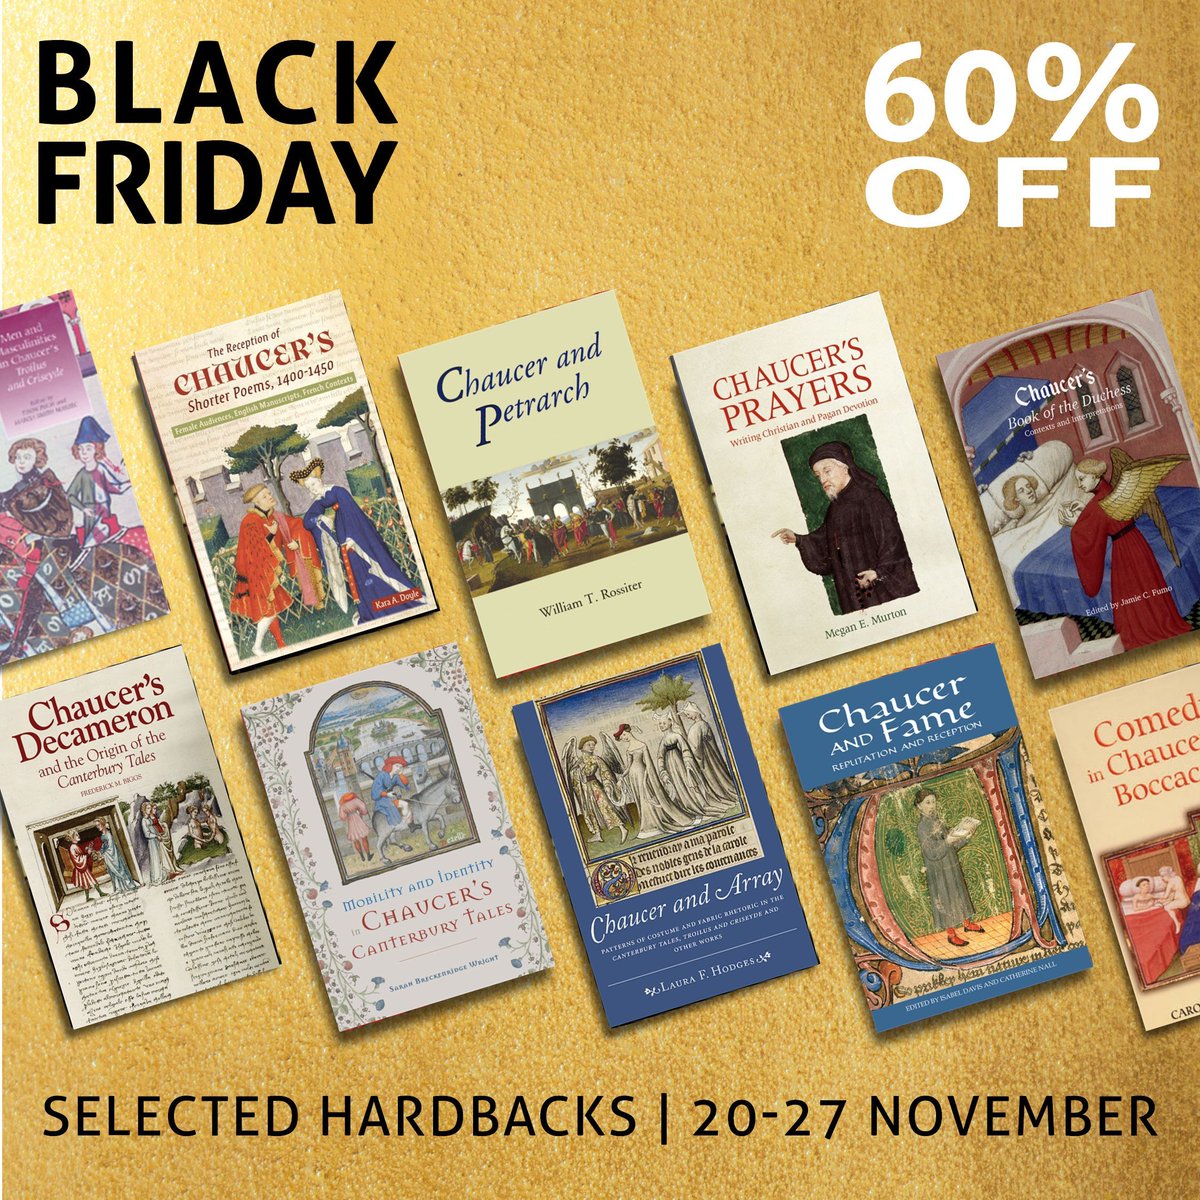 #Chaucer scholars: save 60% on all these and more volumes from our Chaucer Studies series. Just quote promo code ** BB260 ** when you check out! boybrew.co/40zhc3r #BlackFriday